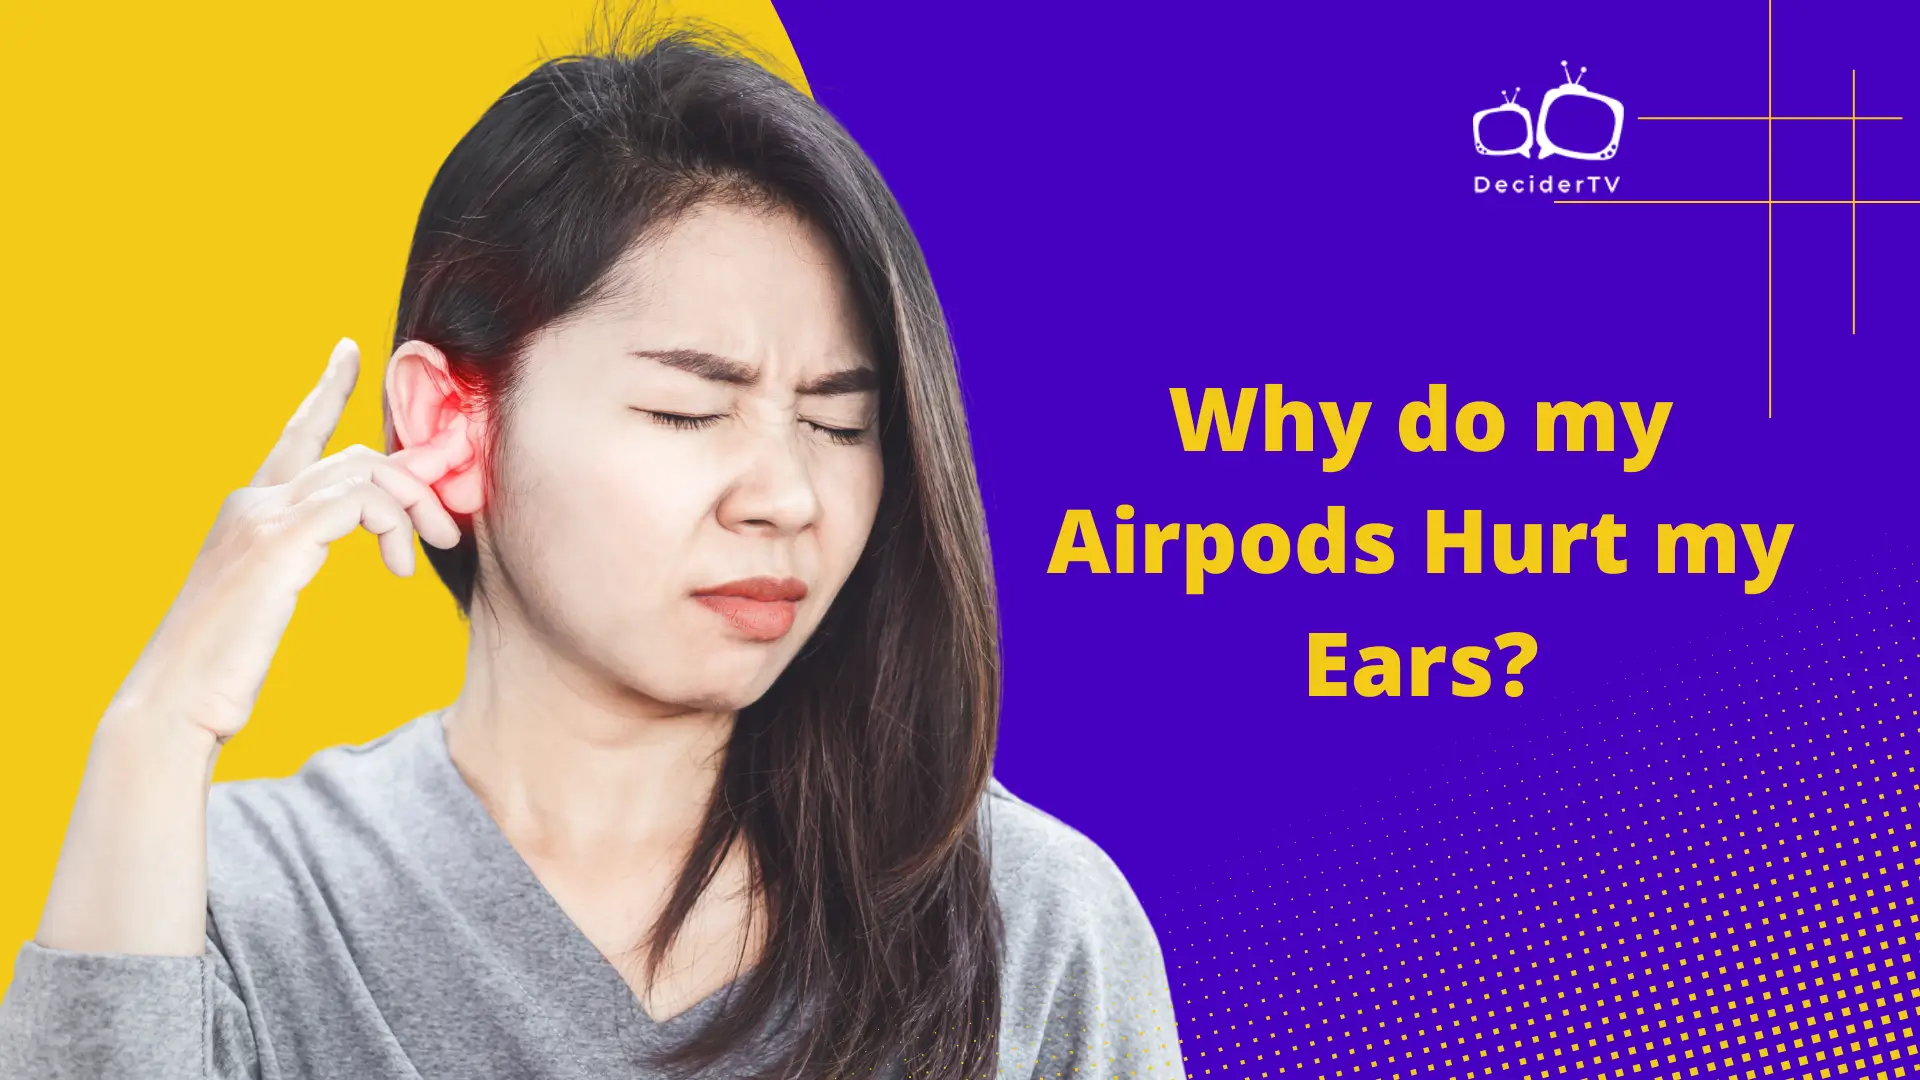 Why do my Airpods Hurt my Ears